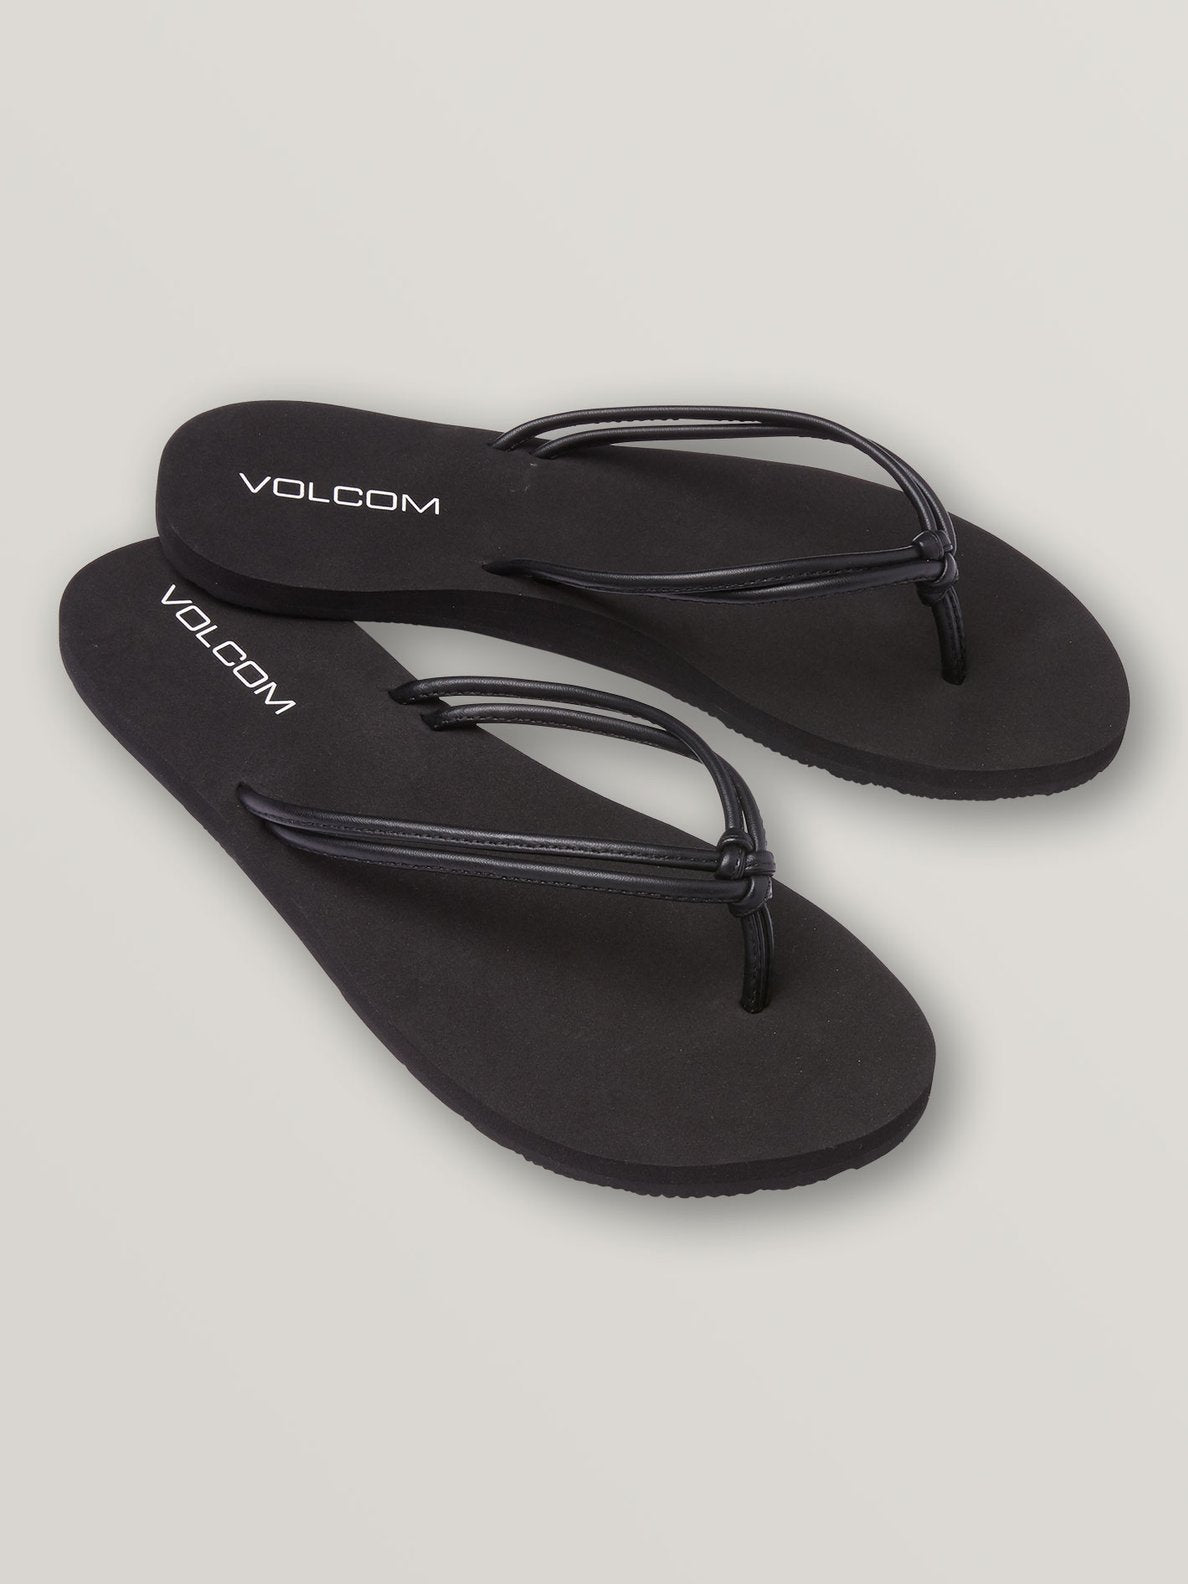 Volcom - Forever and Ever Sandals